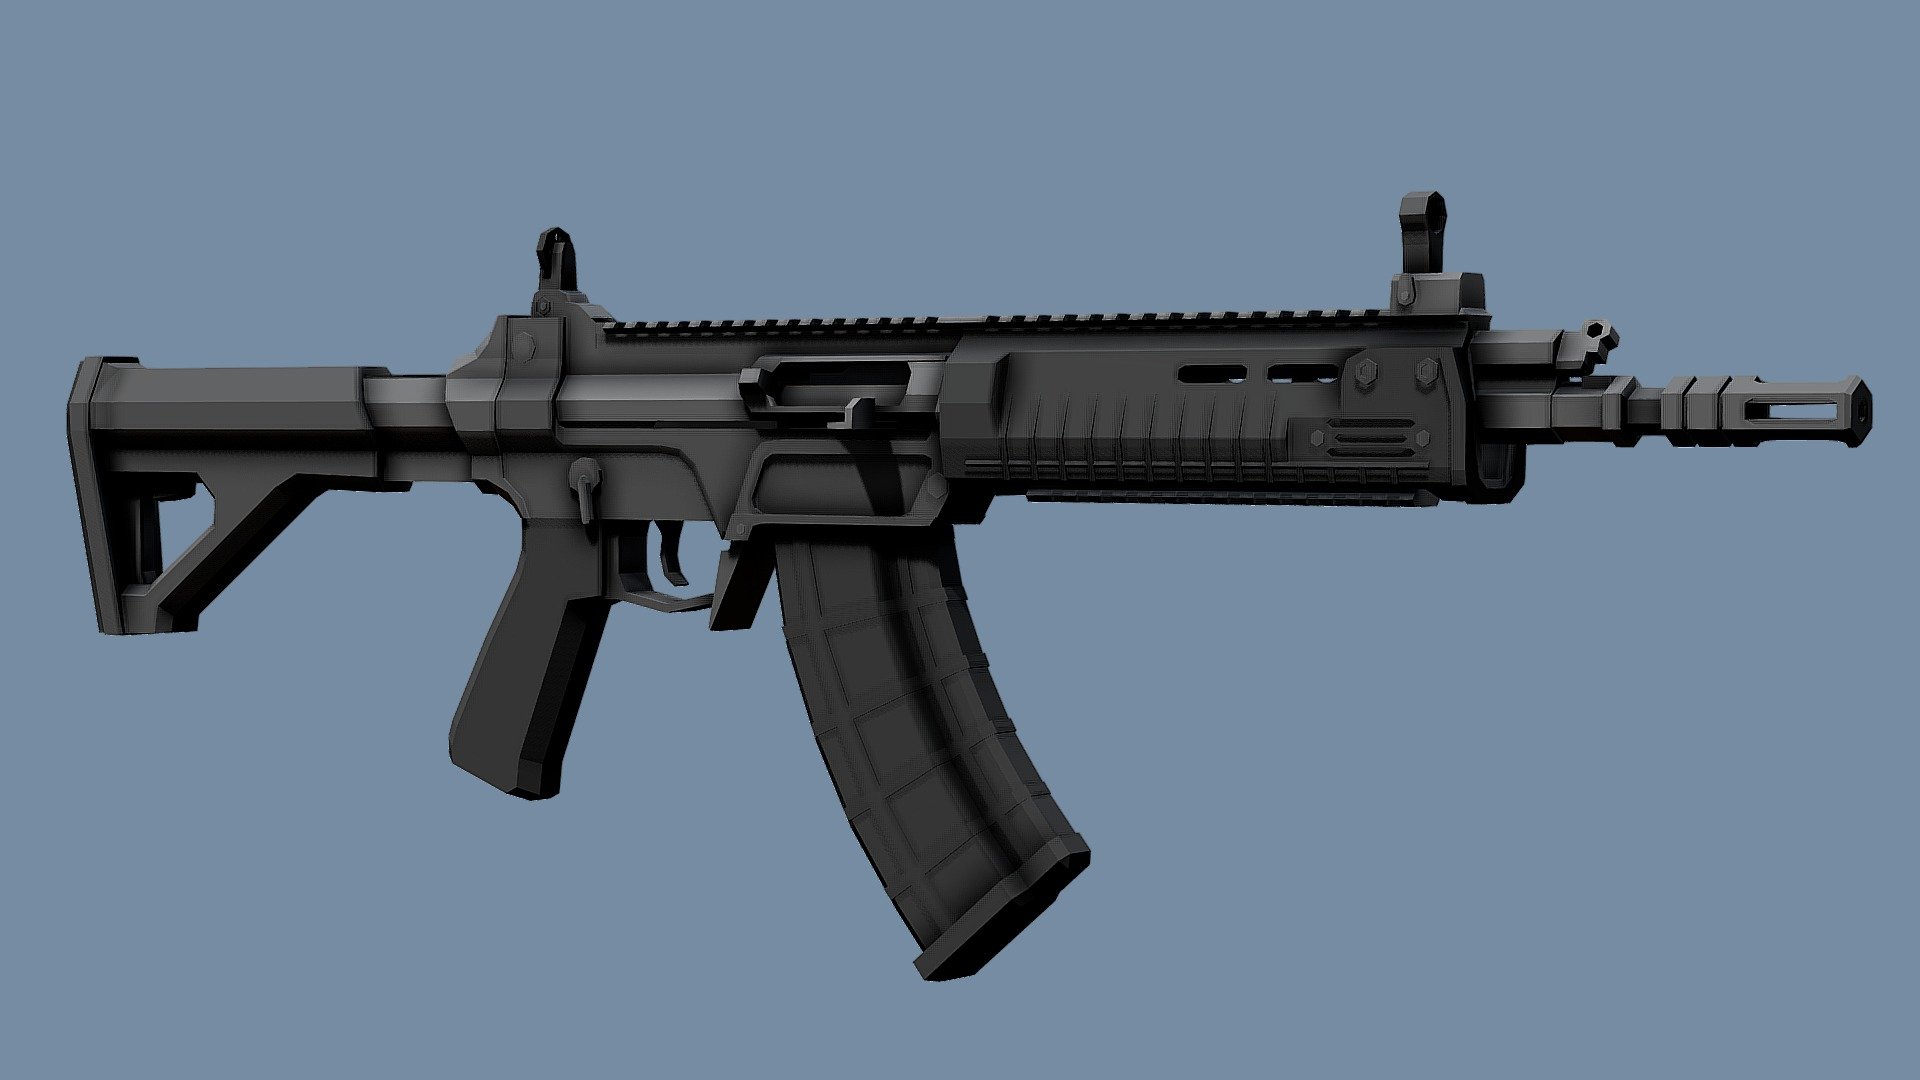 Low Poly Qbz 192 Download Free 3d Model By Tastytony 2ade5a1 Sketchfab 